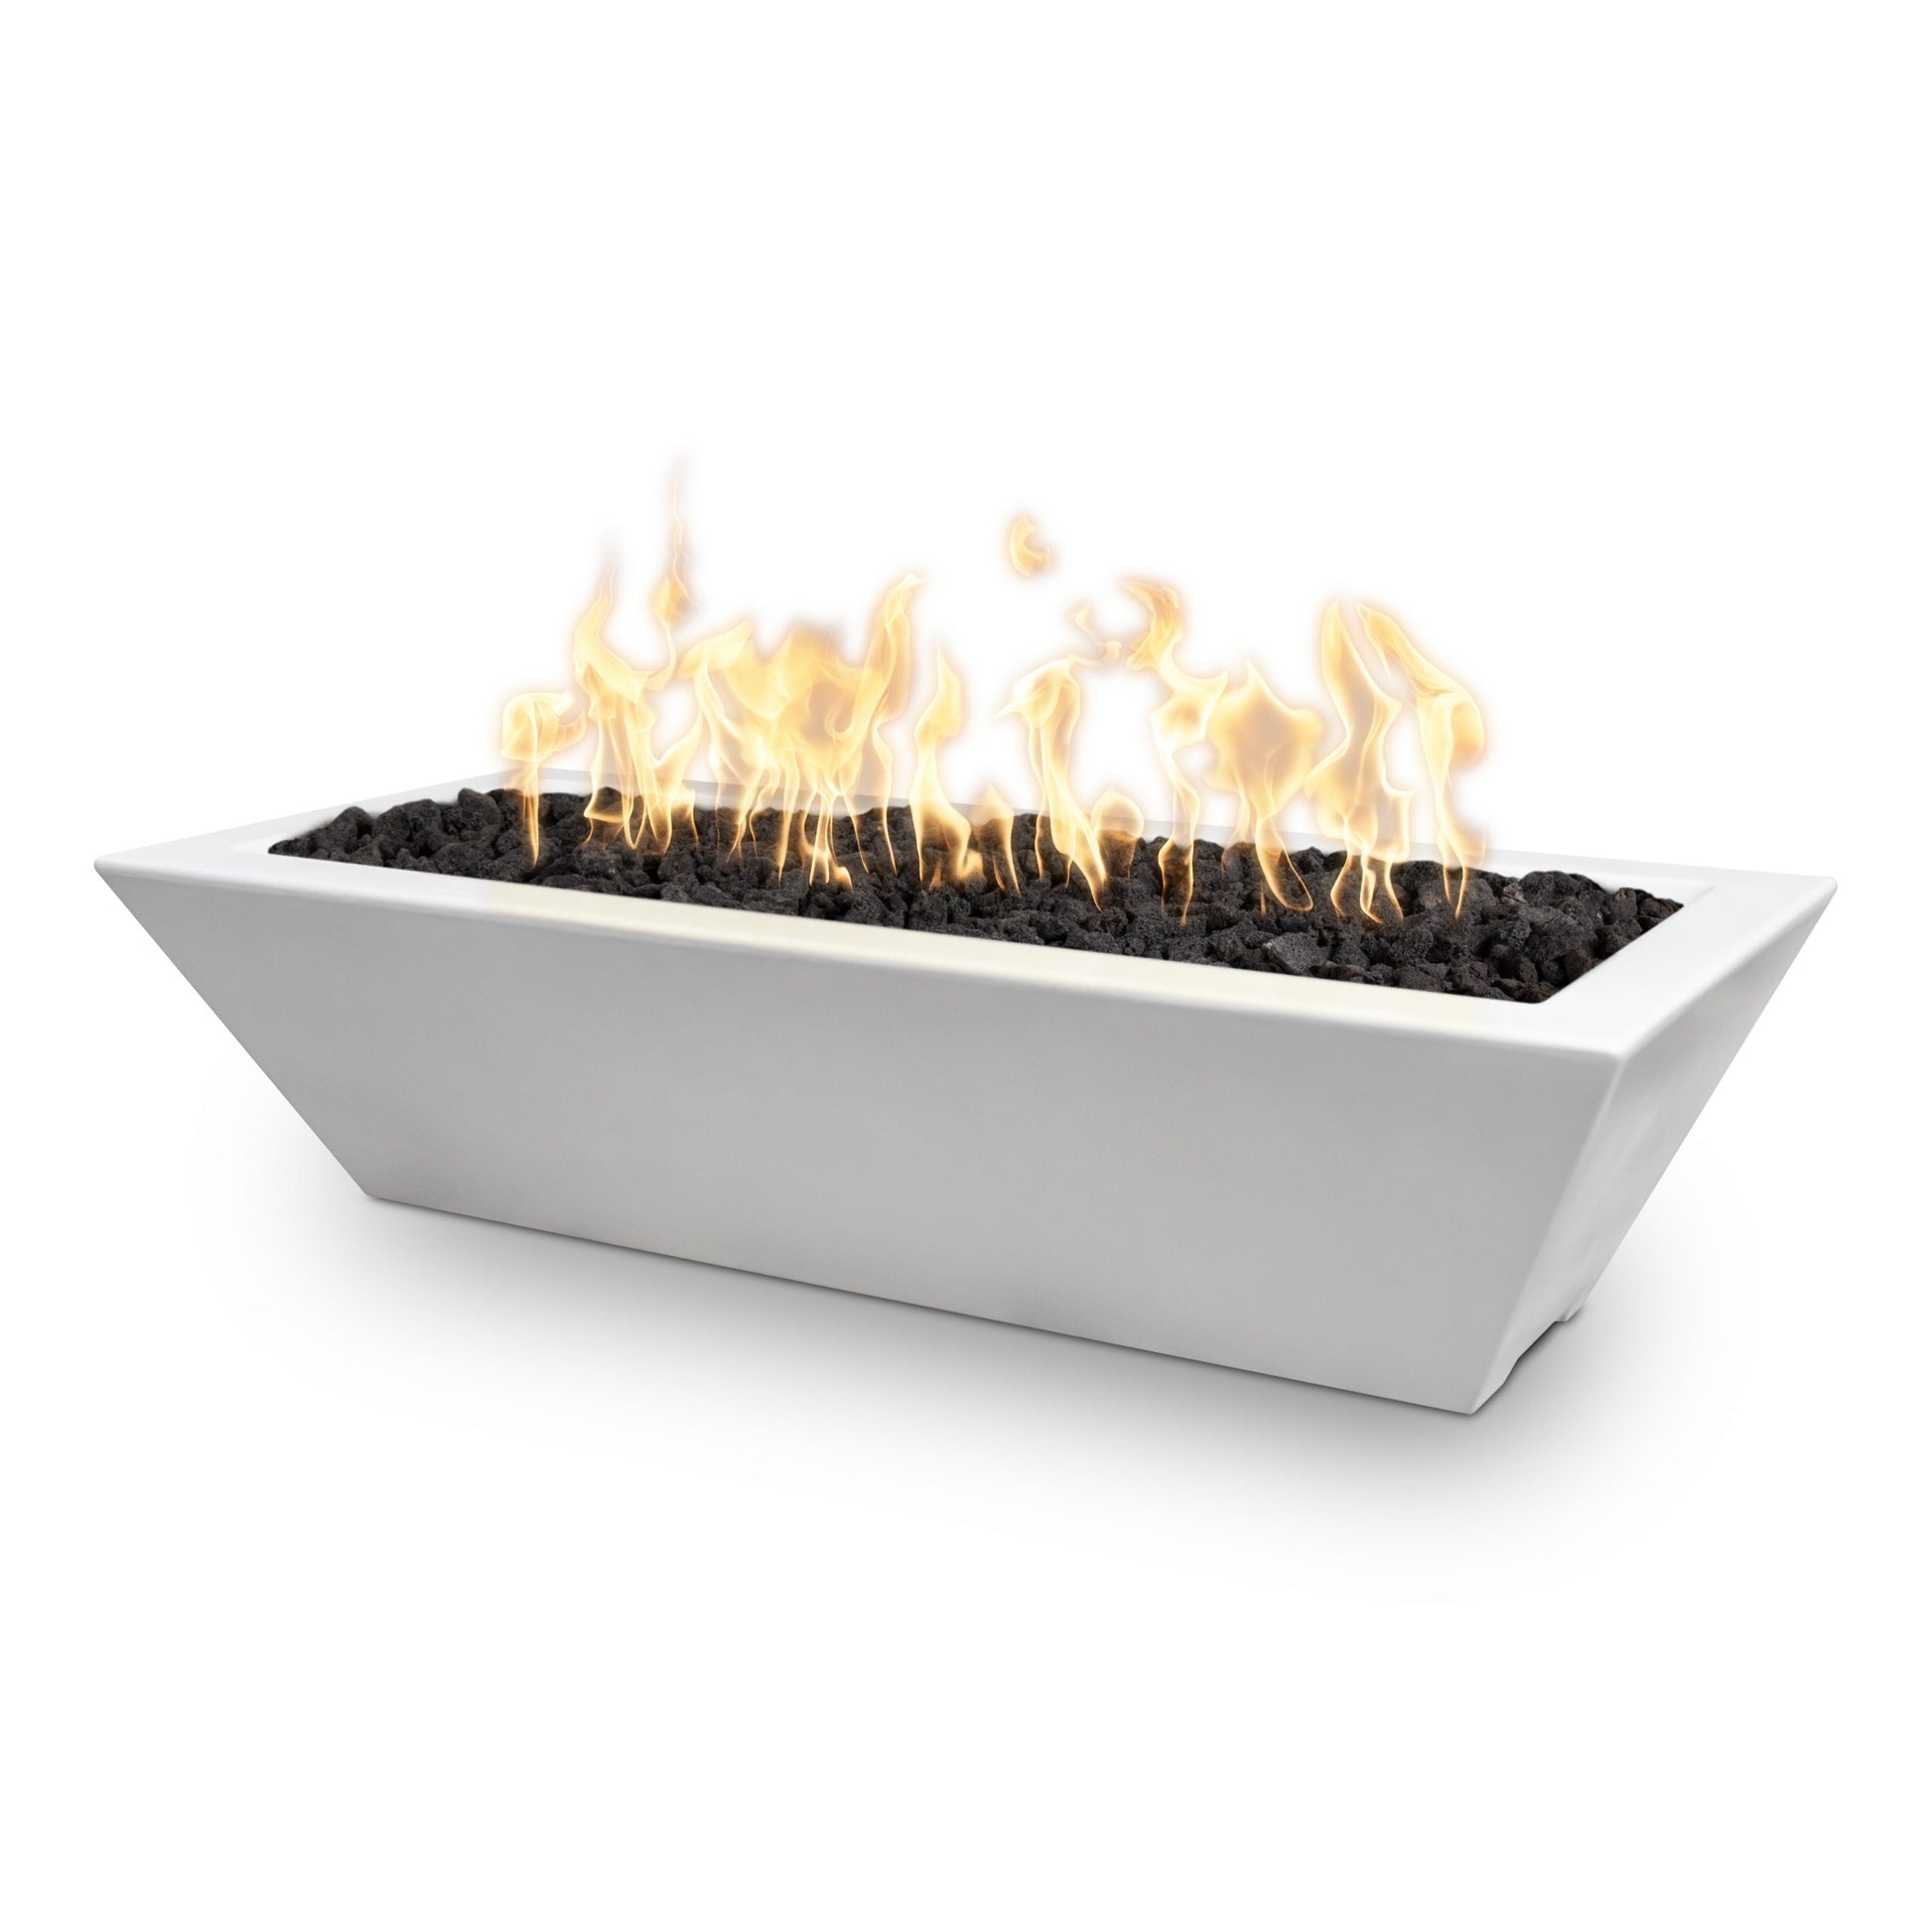 The Outdoor Plus Linear Maya 48" Chocolate GFRC Concrete Liquid Propane Fire Bowl with Match Lit with Flame Sense Ignition